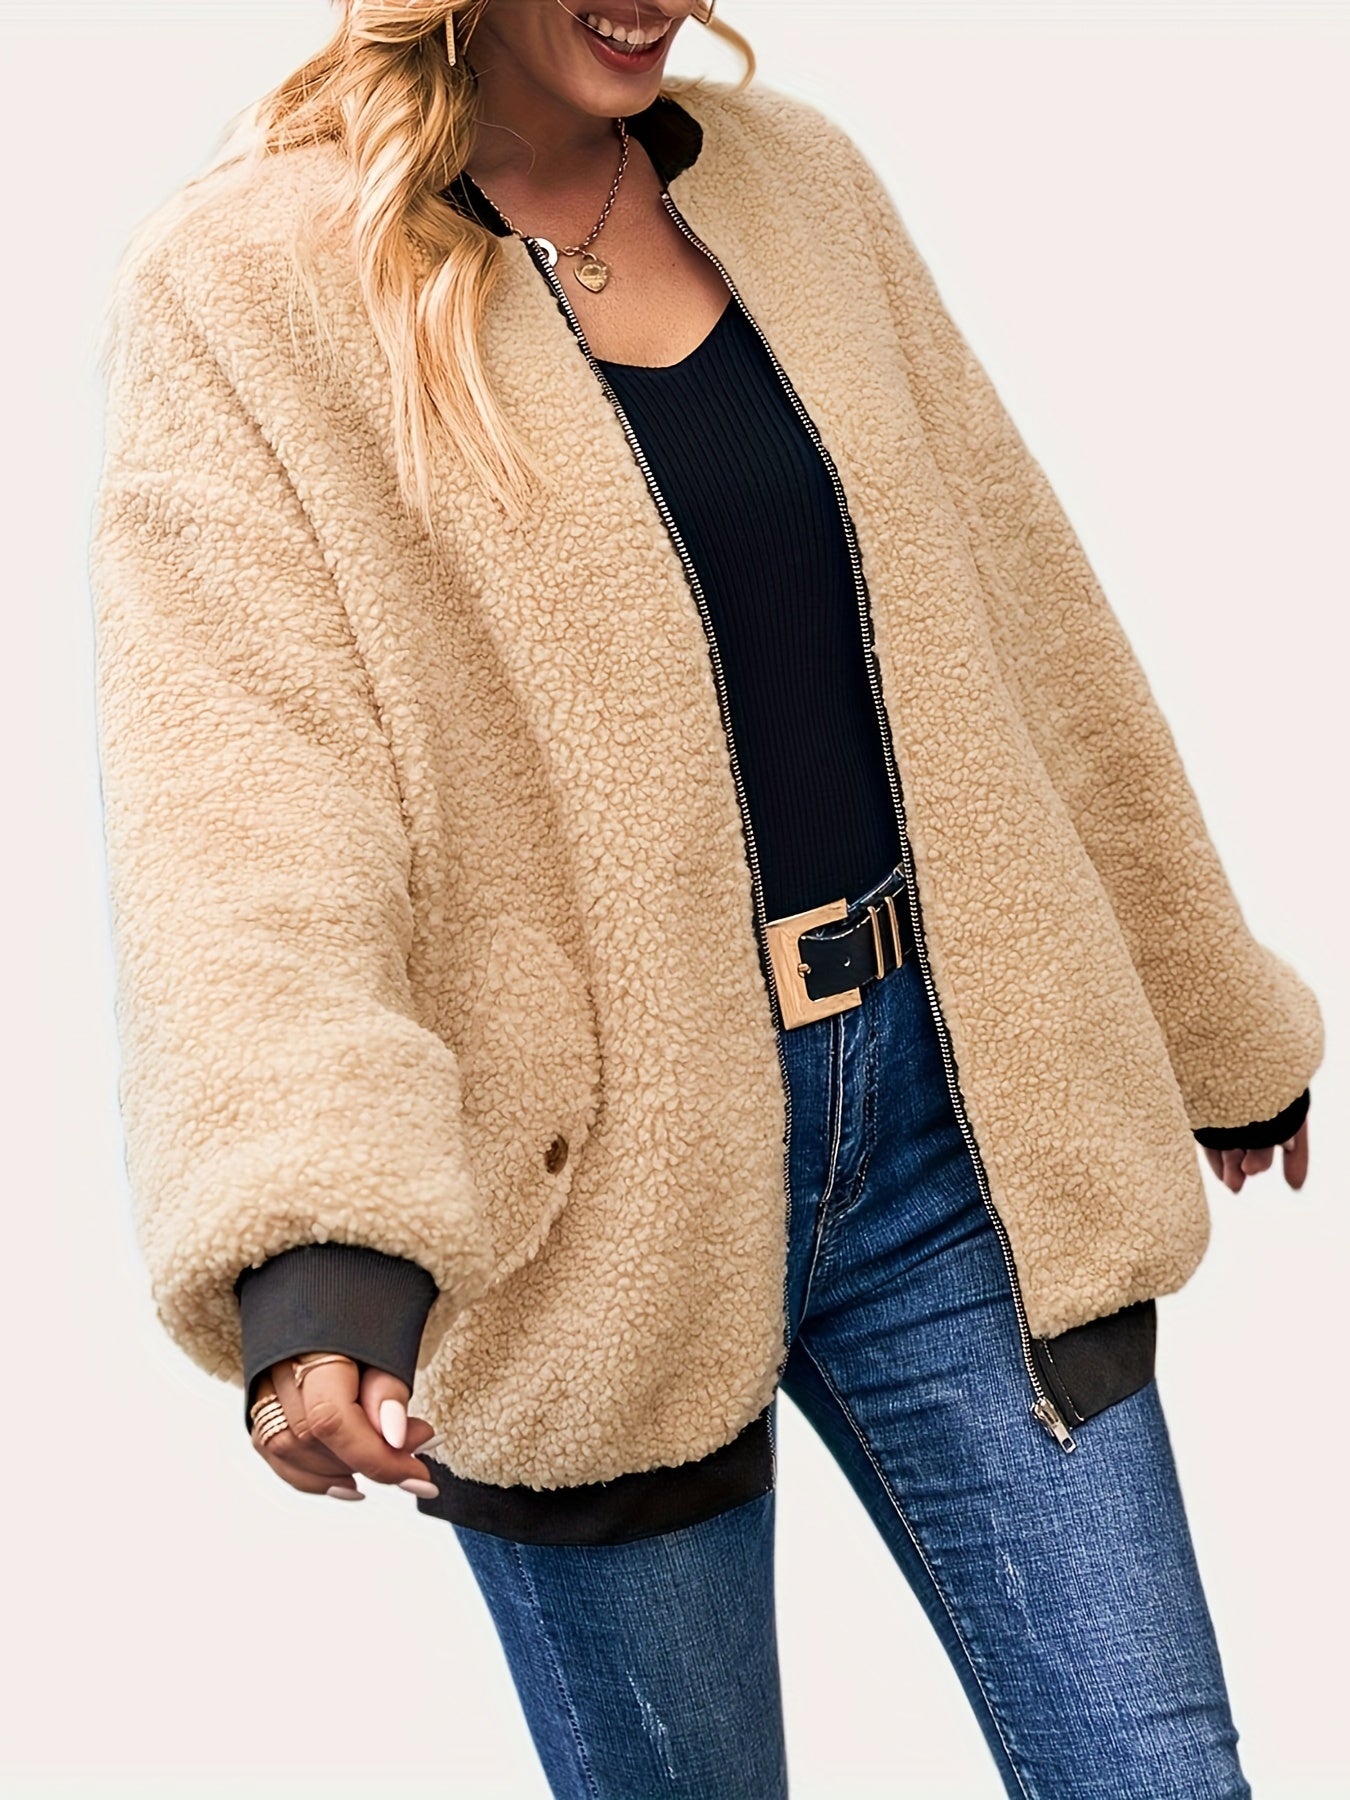 Antmvs Teddy Bomber Fall & Winter Jacket, Casual Zip Up Long Sleeve Outerwear, Women's Clothing